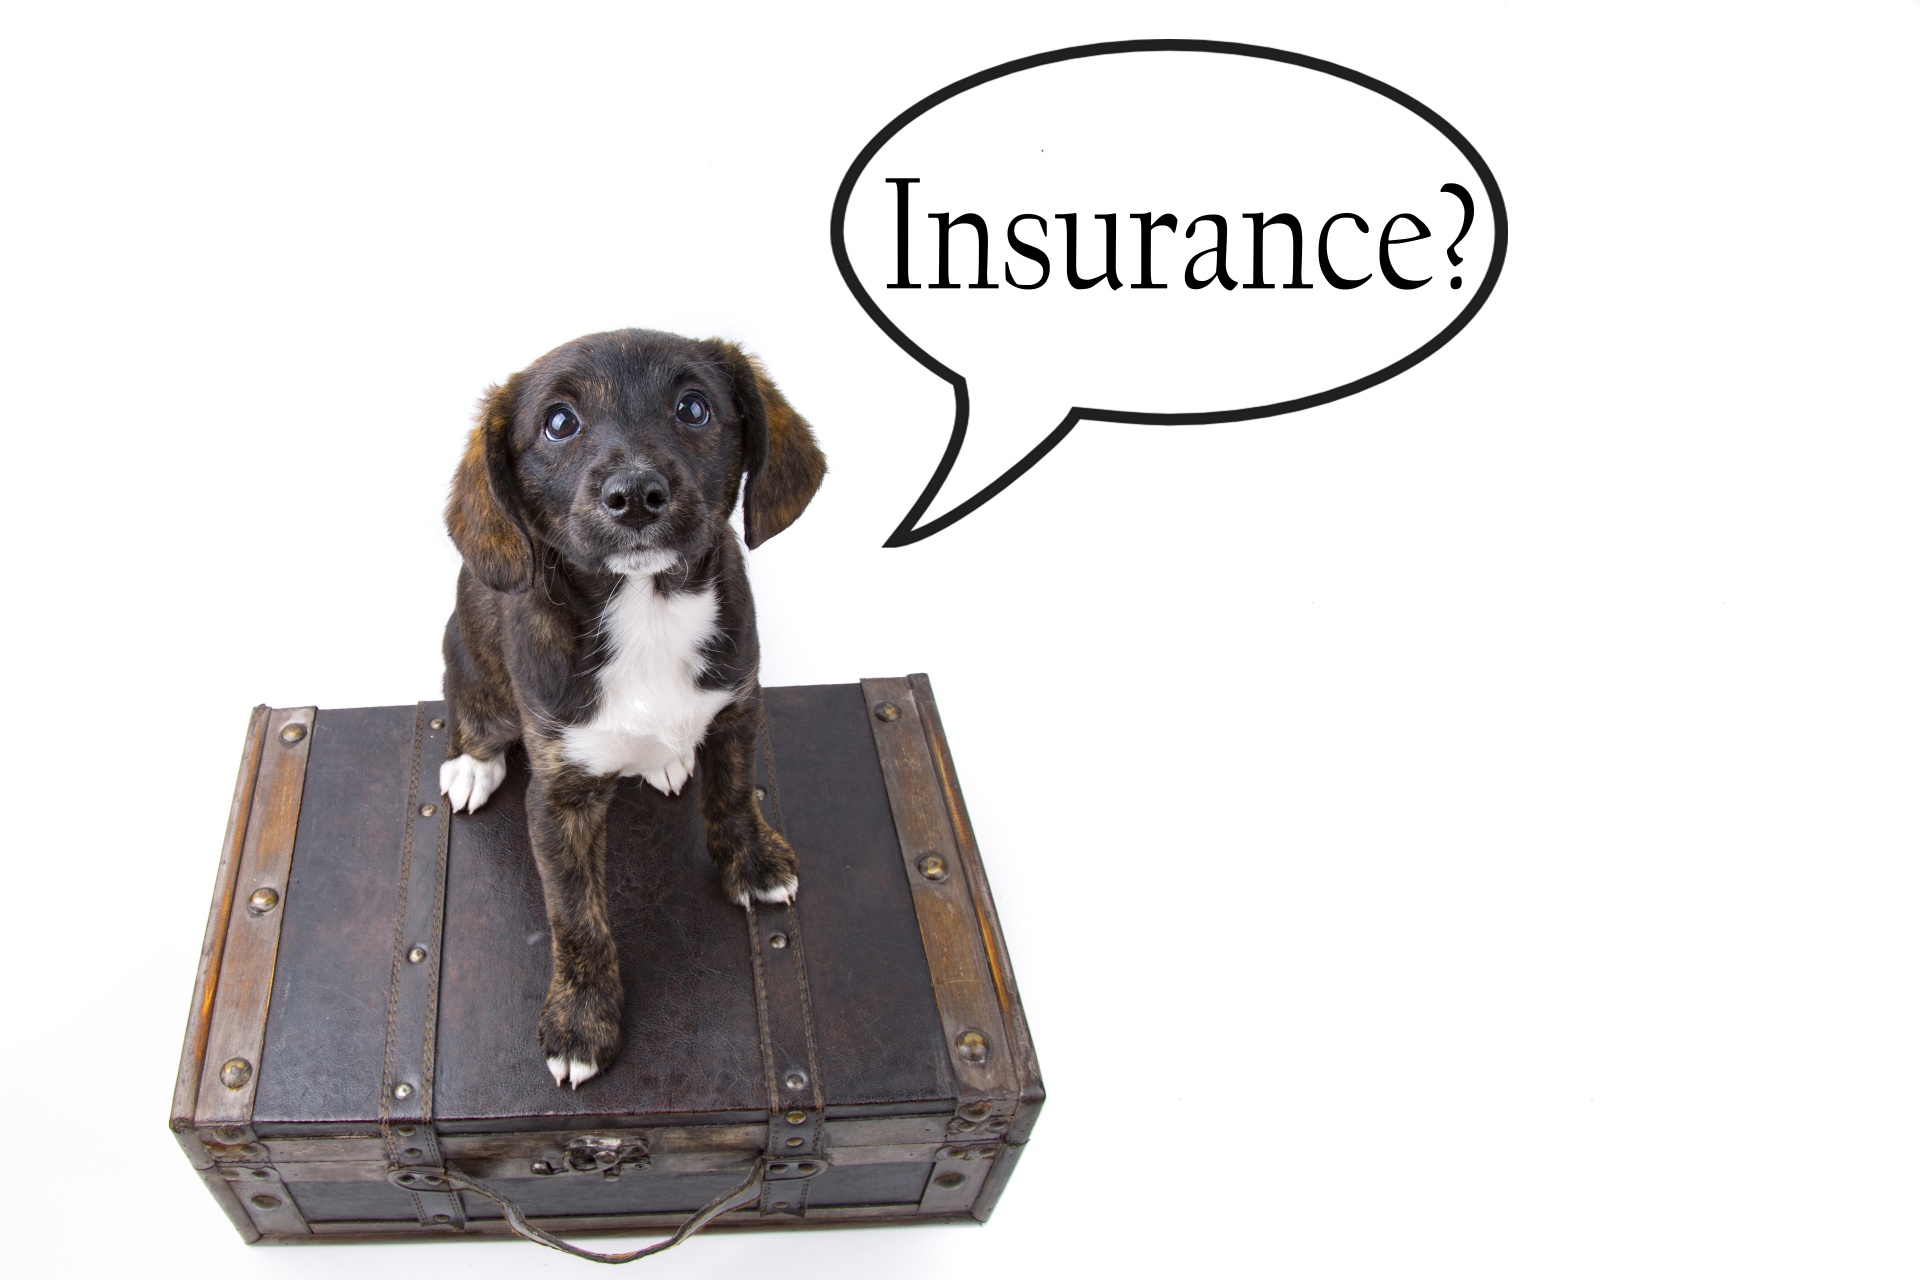 Dog with thought bubble saying "Insurance?"